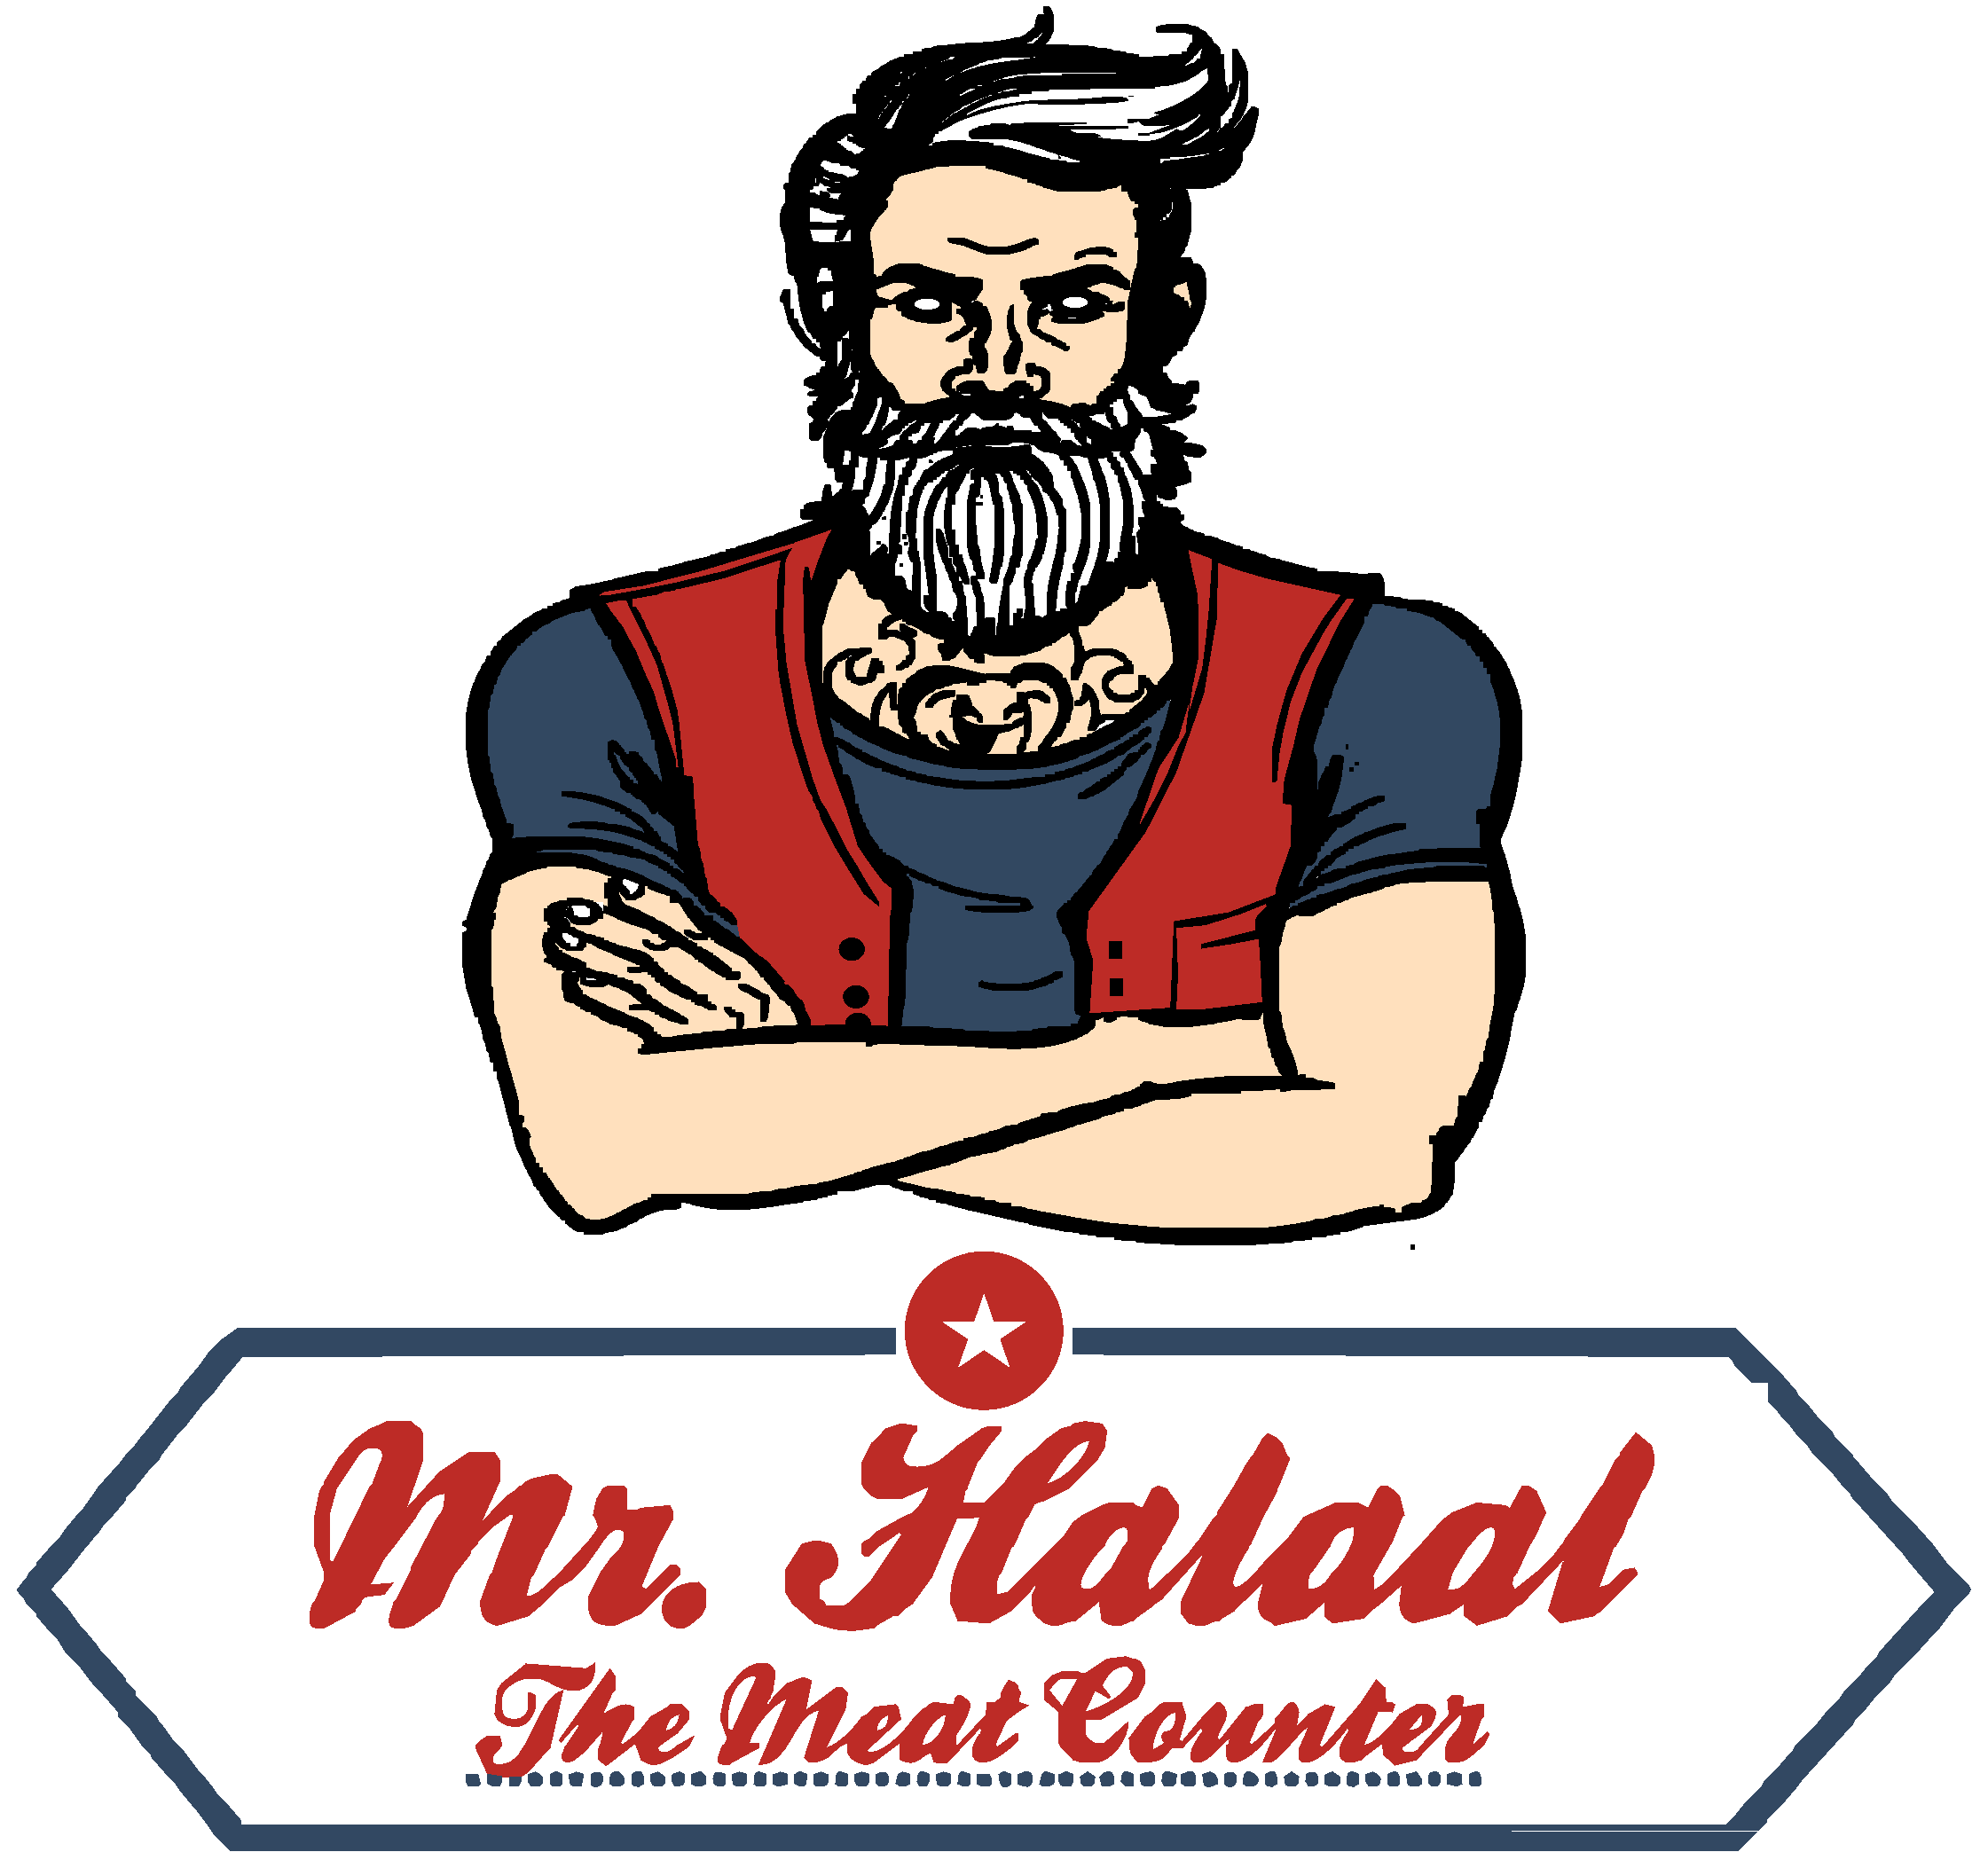 Home halaal the meat. Mr clipart male model